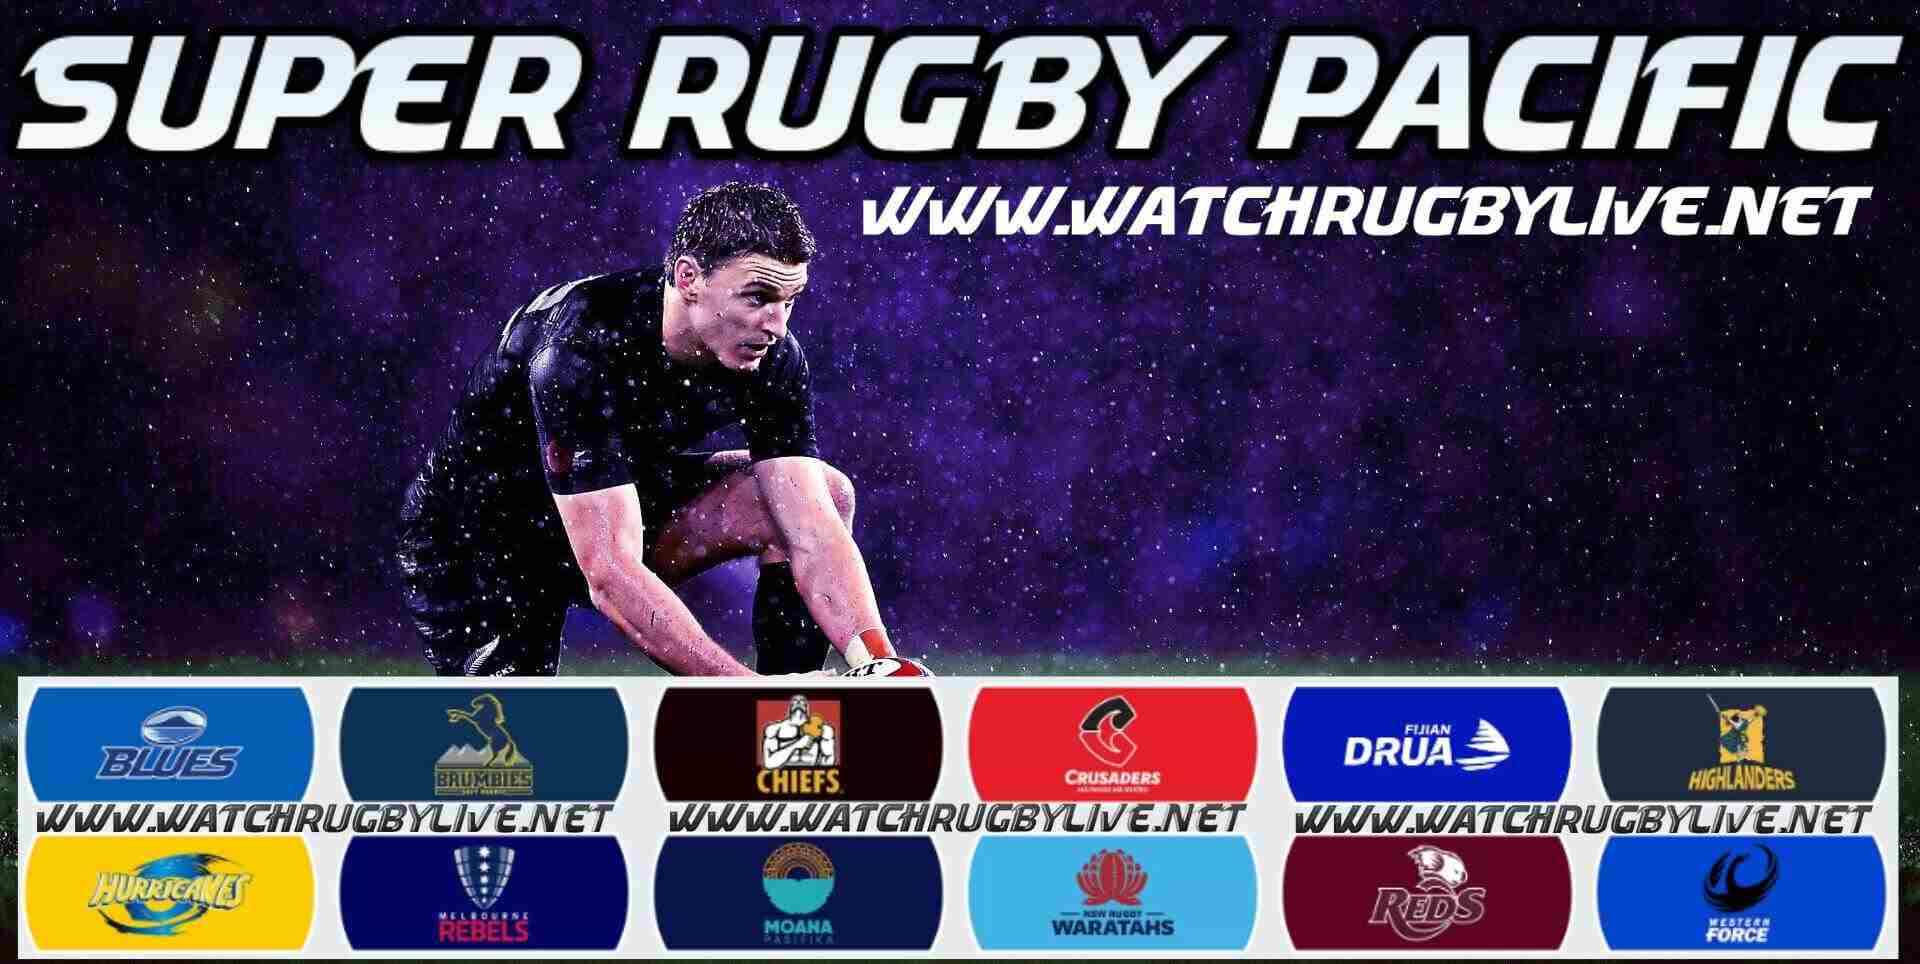 Watch Super Rugby Pacific Live Streaming On Smart Devices